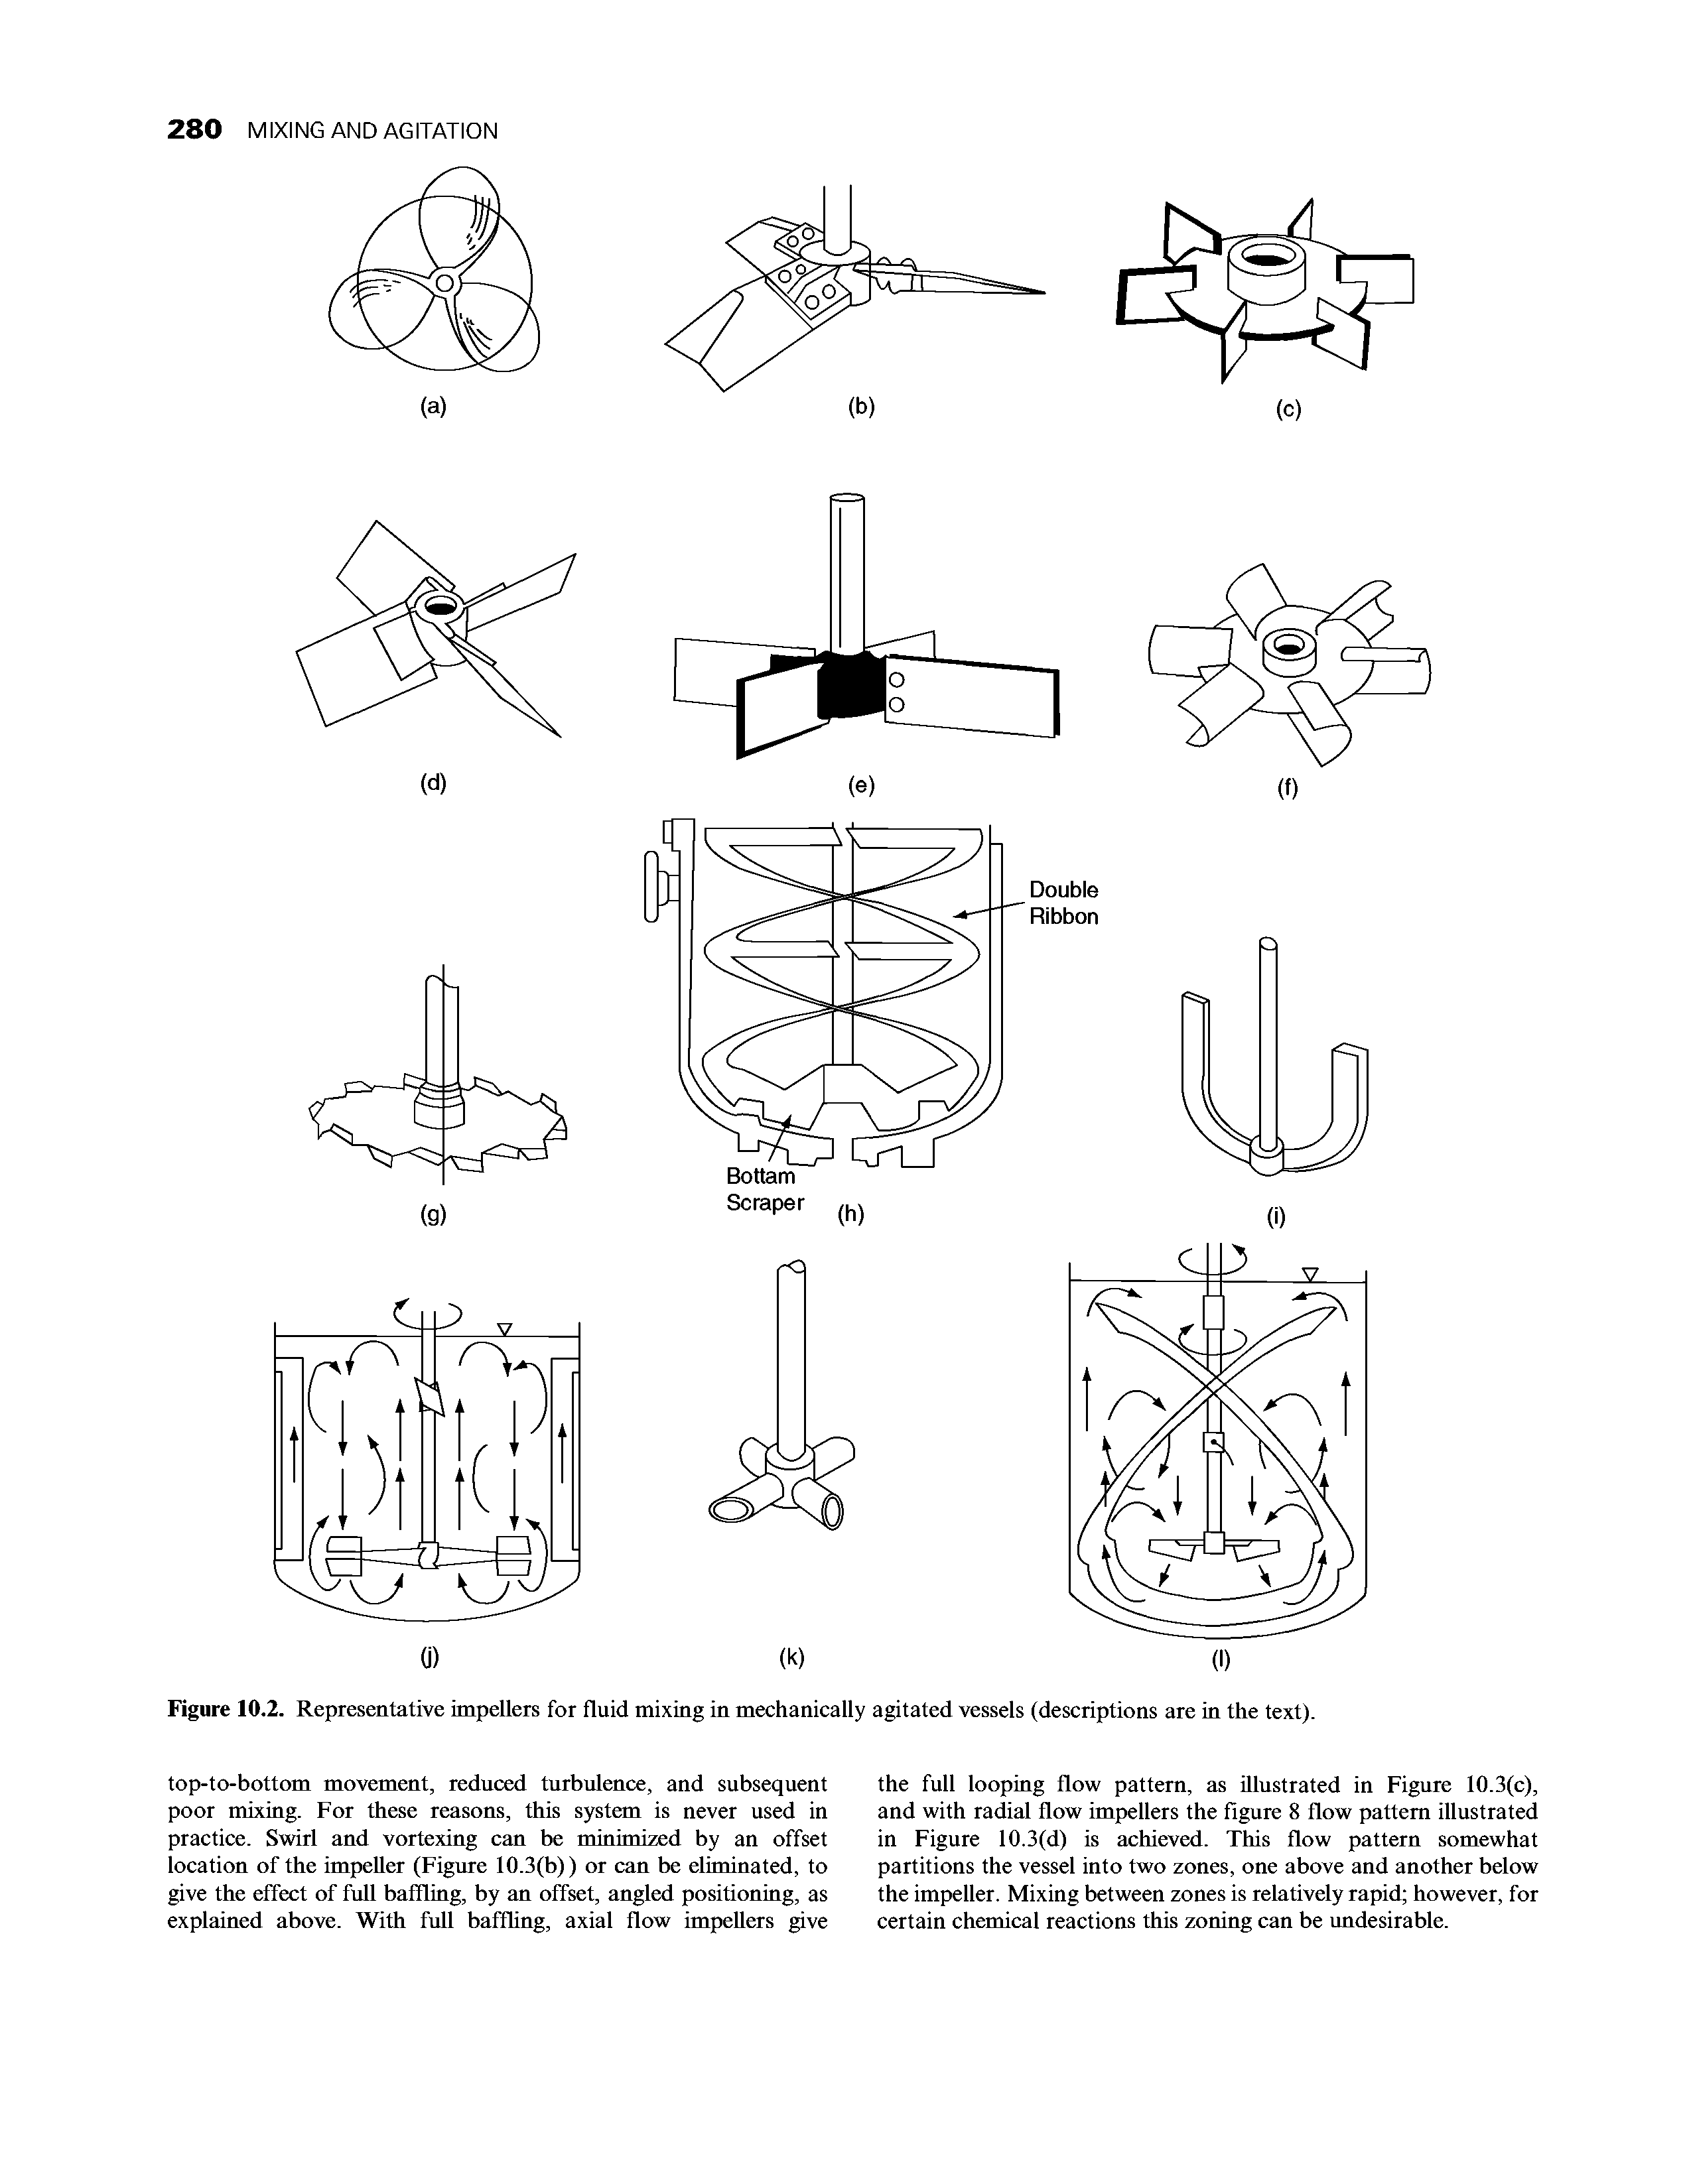 Figure 10.2. Representative impellers for fluid mixing in mechanically agitated vessels (descriptions are in the text).